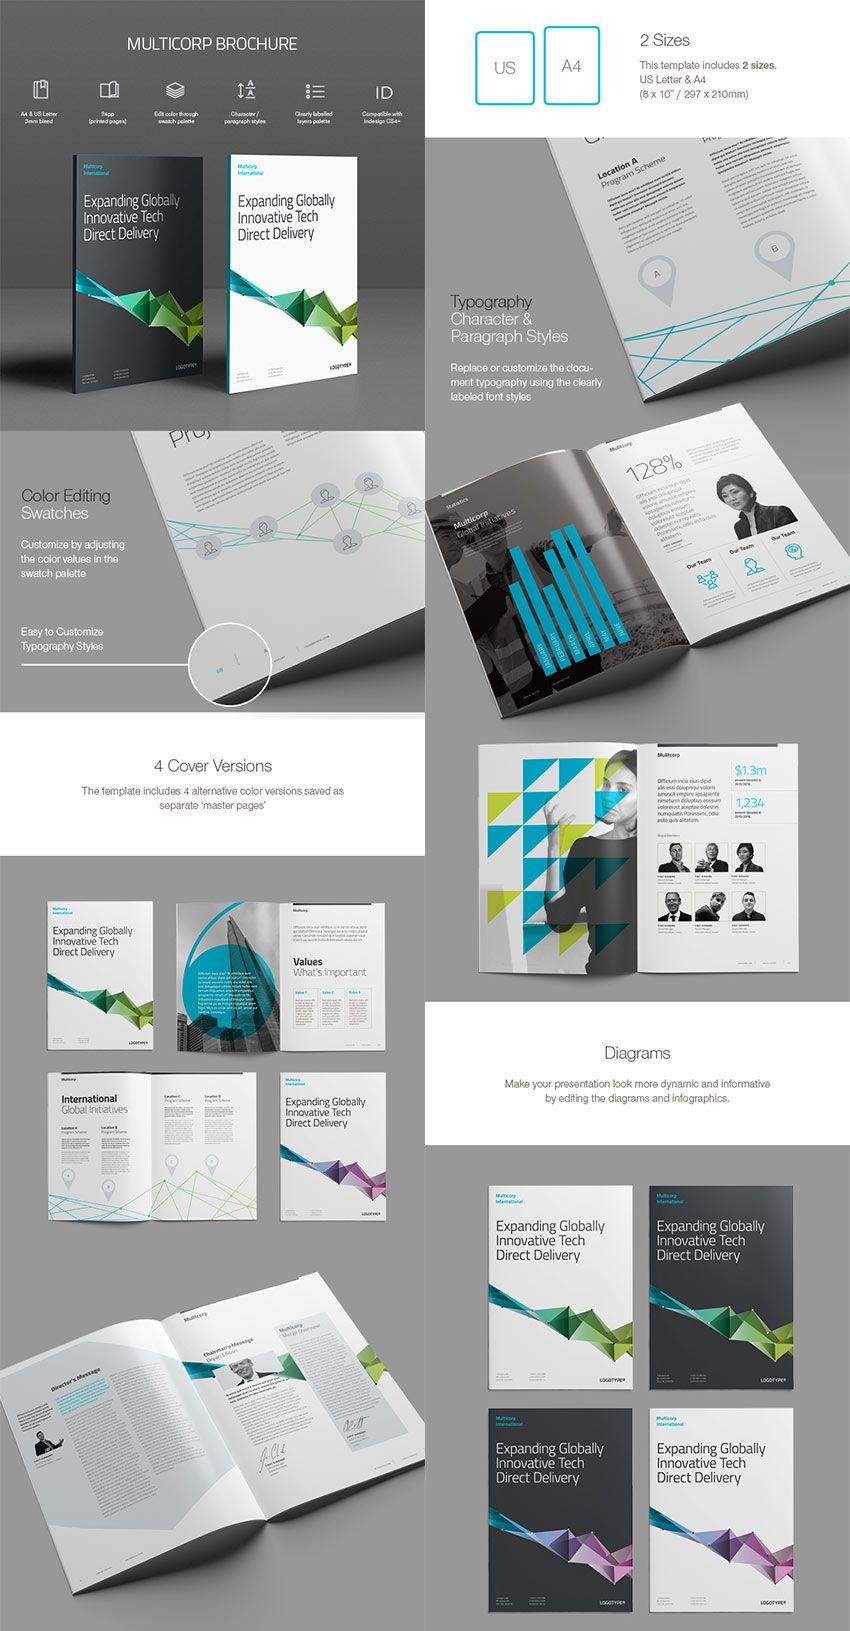 20 Best Indesign Brochure Templates – For Creative Business With Brochure Templates Free Download Indesign